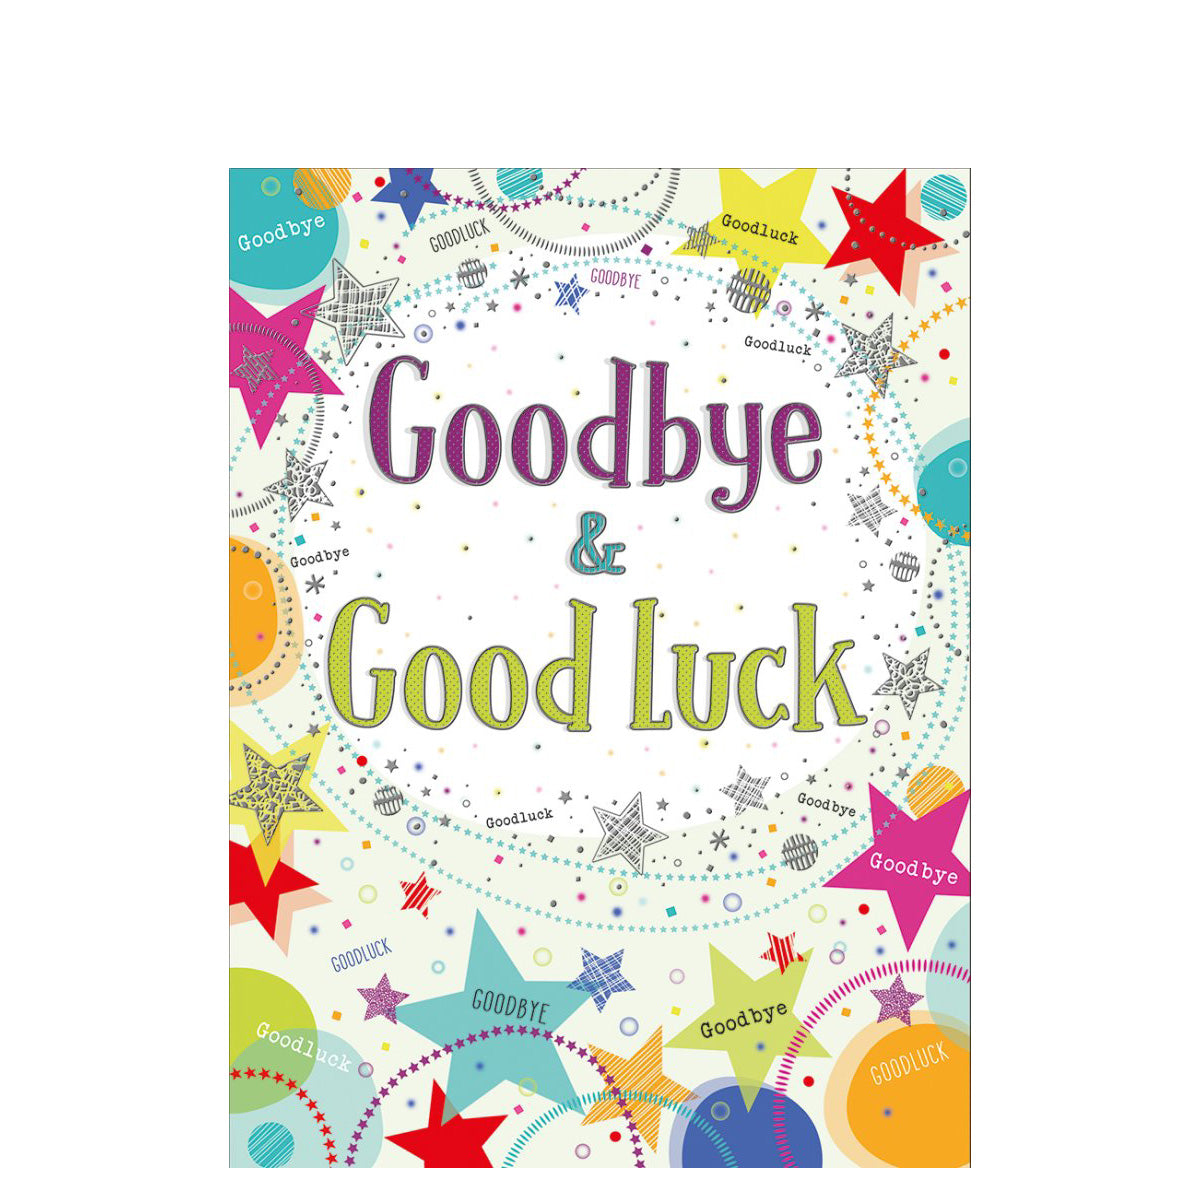 Goodbye and Goodluck Text Starts Greeting Card 12in X 9in